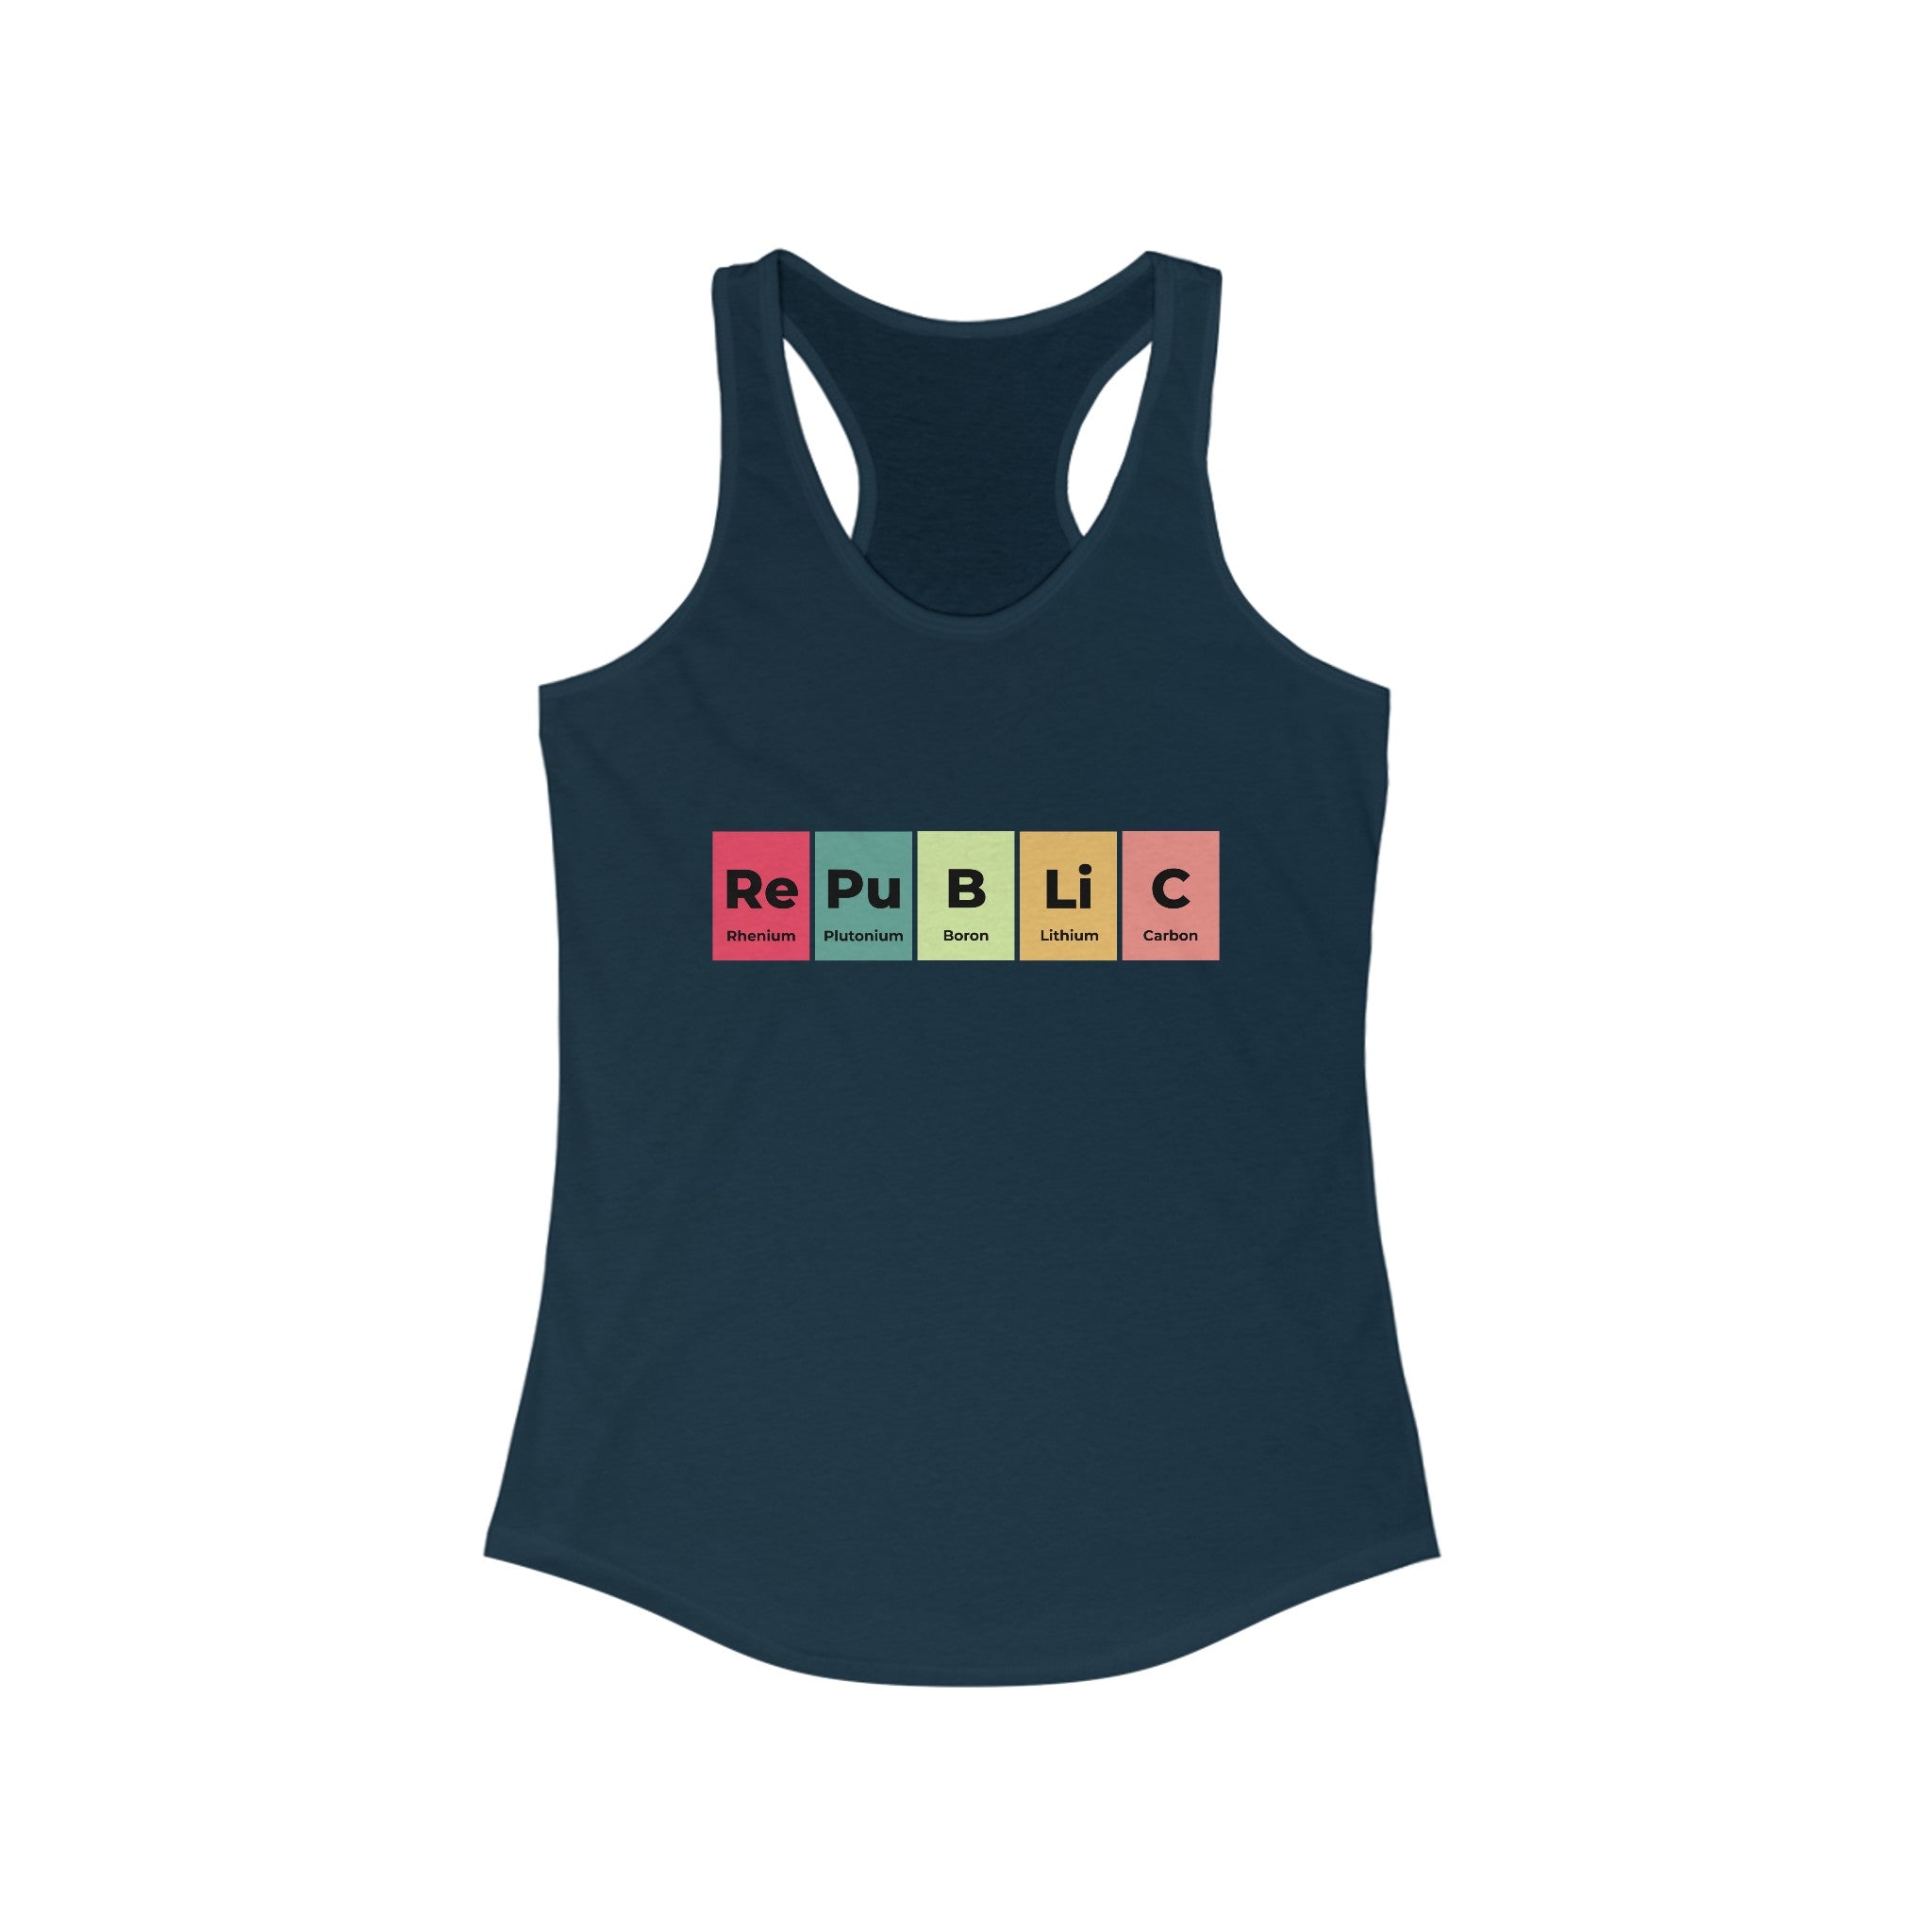 A navy blue Republic - Women's Racerback Tank featuring a design that spells "Republic" using periodic table elements with the abbreviations Re, Pu, B, Li, and C. This ultra-lightweight top is perfect for your fitness journey.